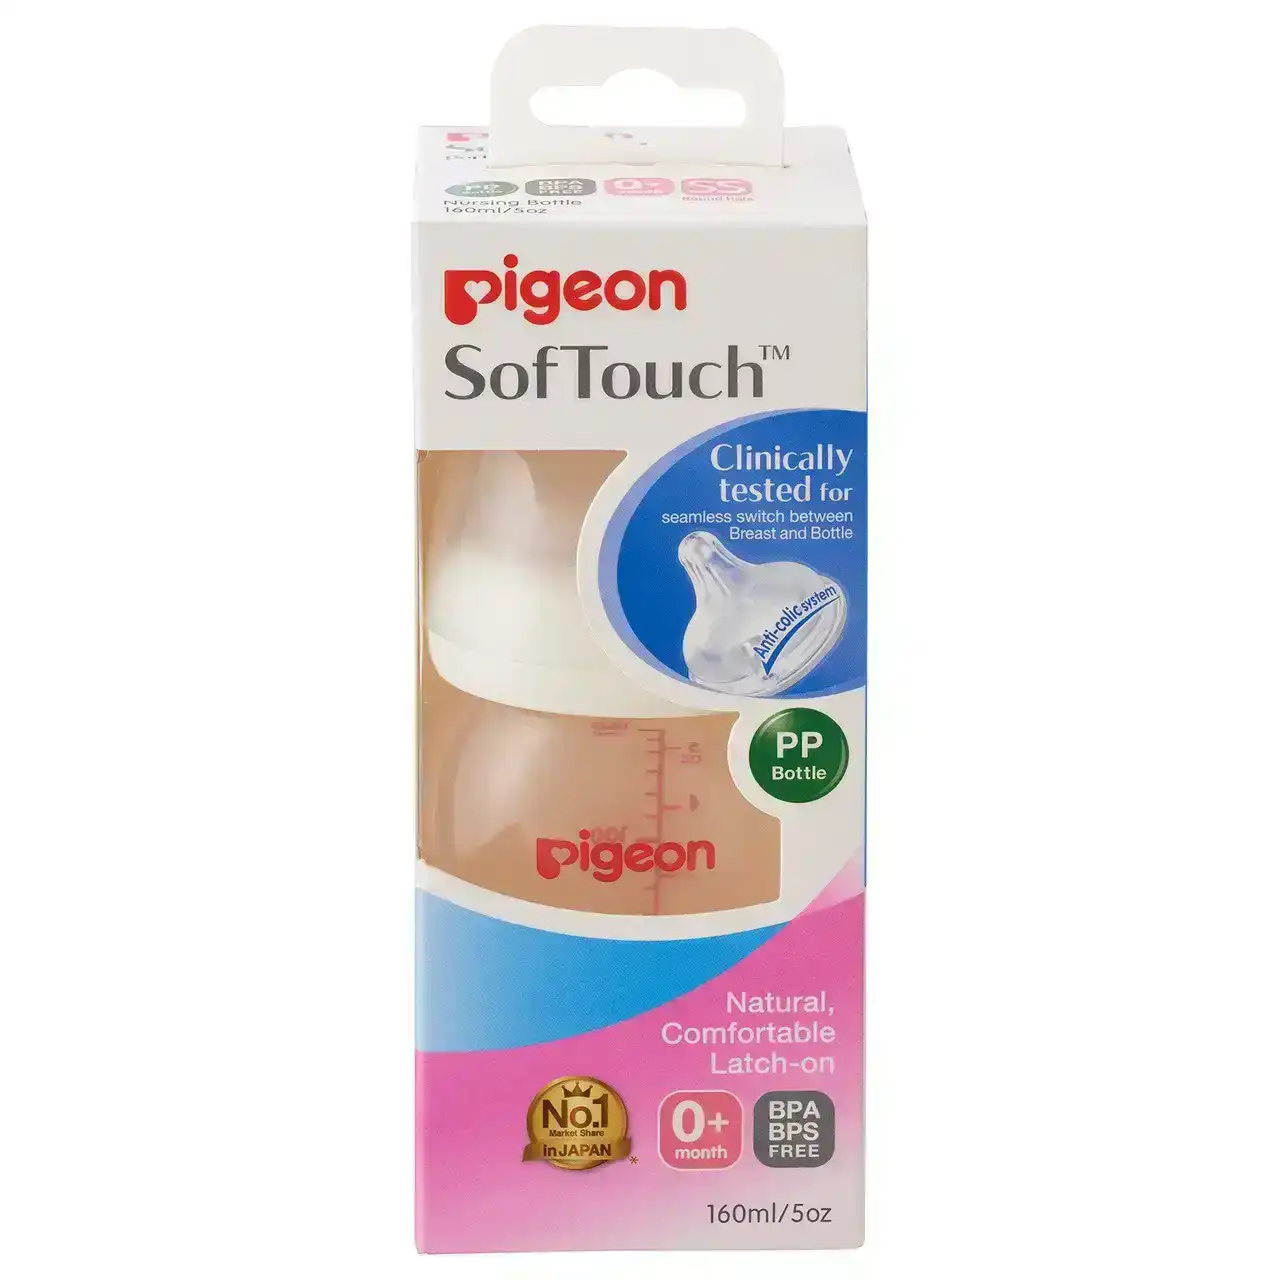 PIGEON Softouch Bottle PP 160ml